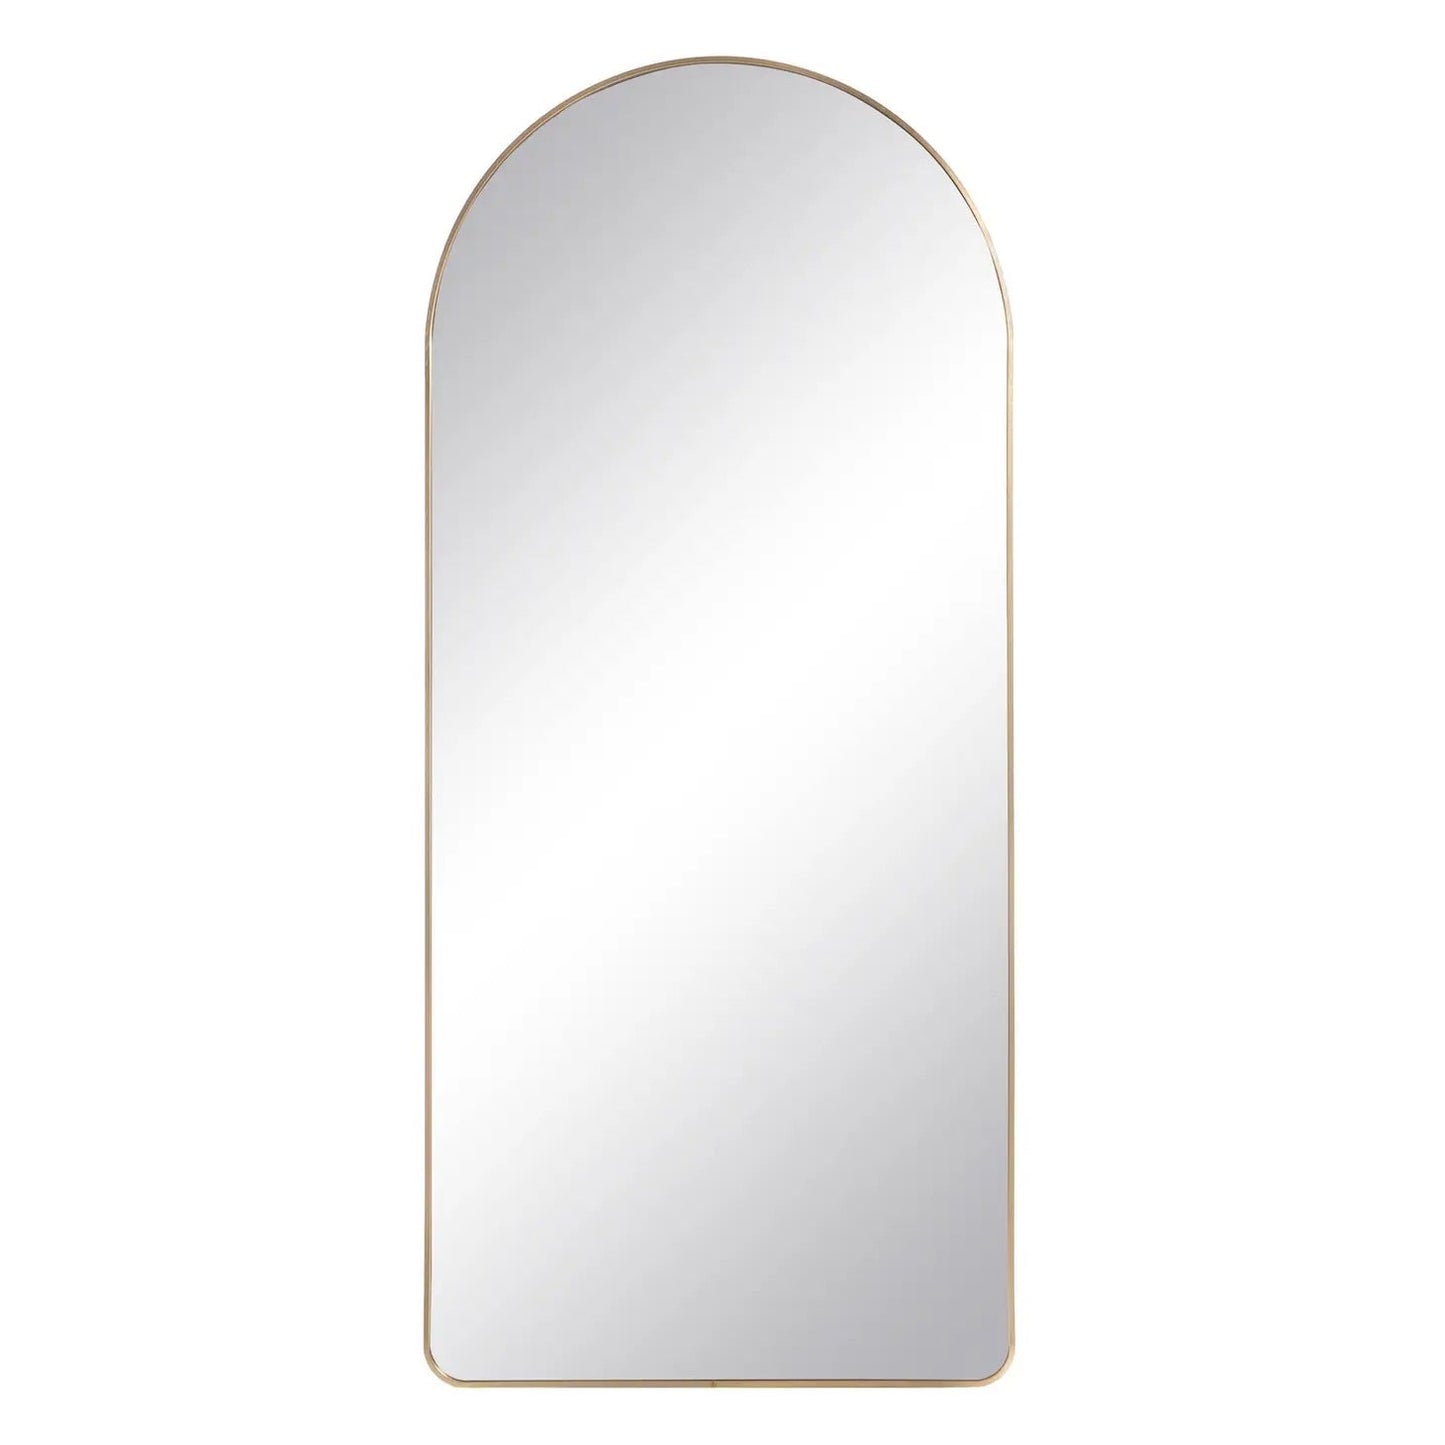 71" Gold Curve Standing Floor Mirror - Rounded Easel Cheval Minimalist Clean Luxury Designer